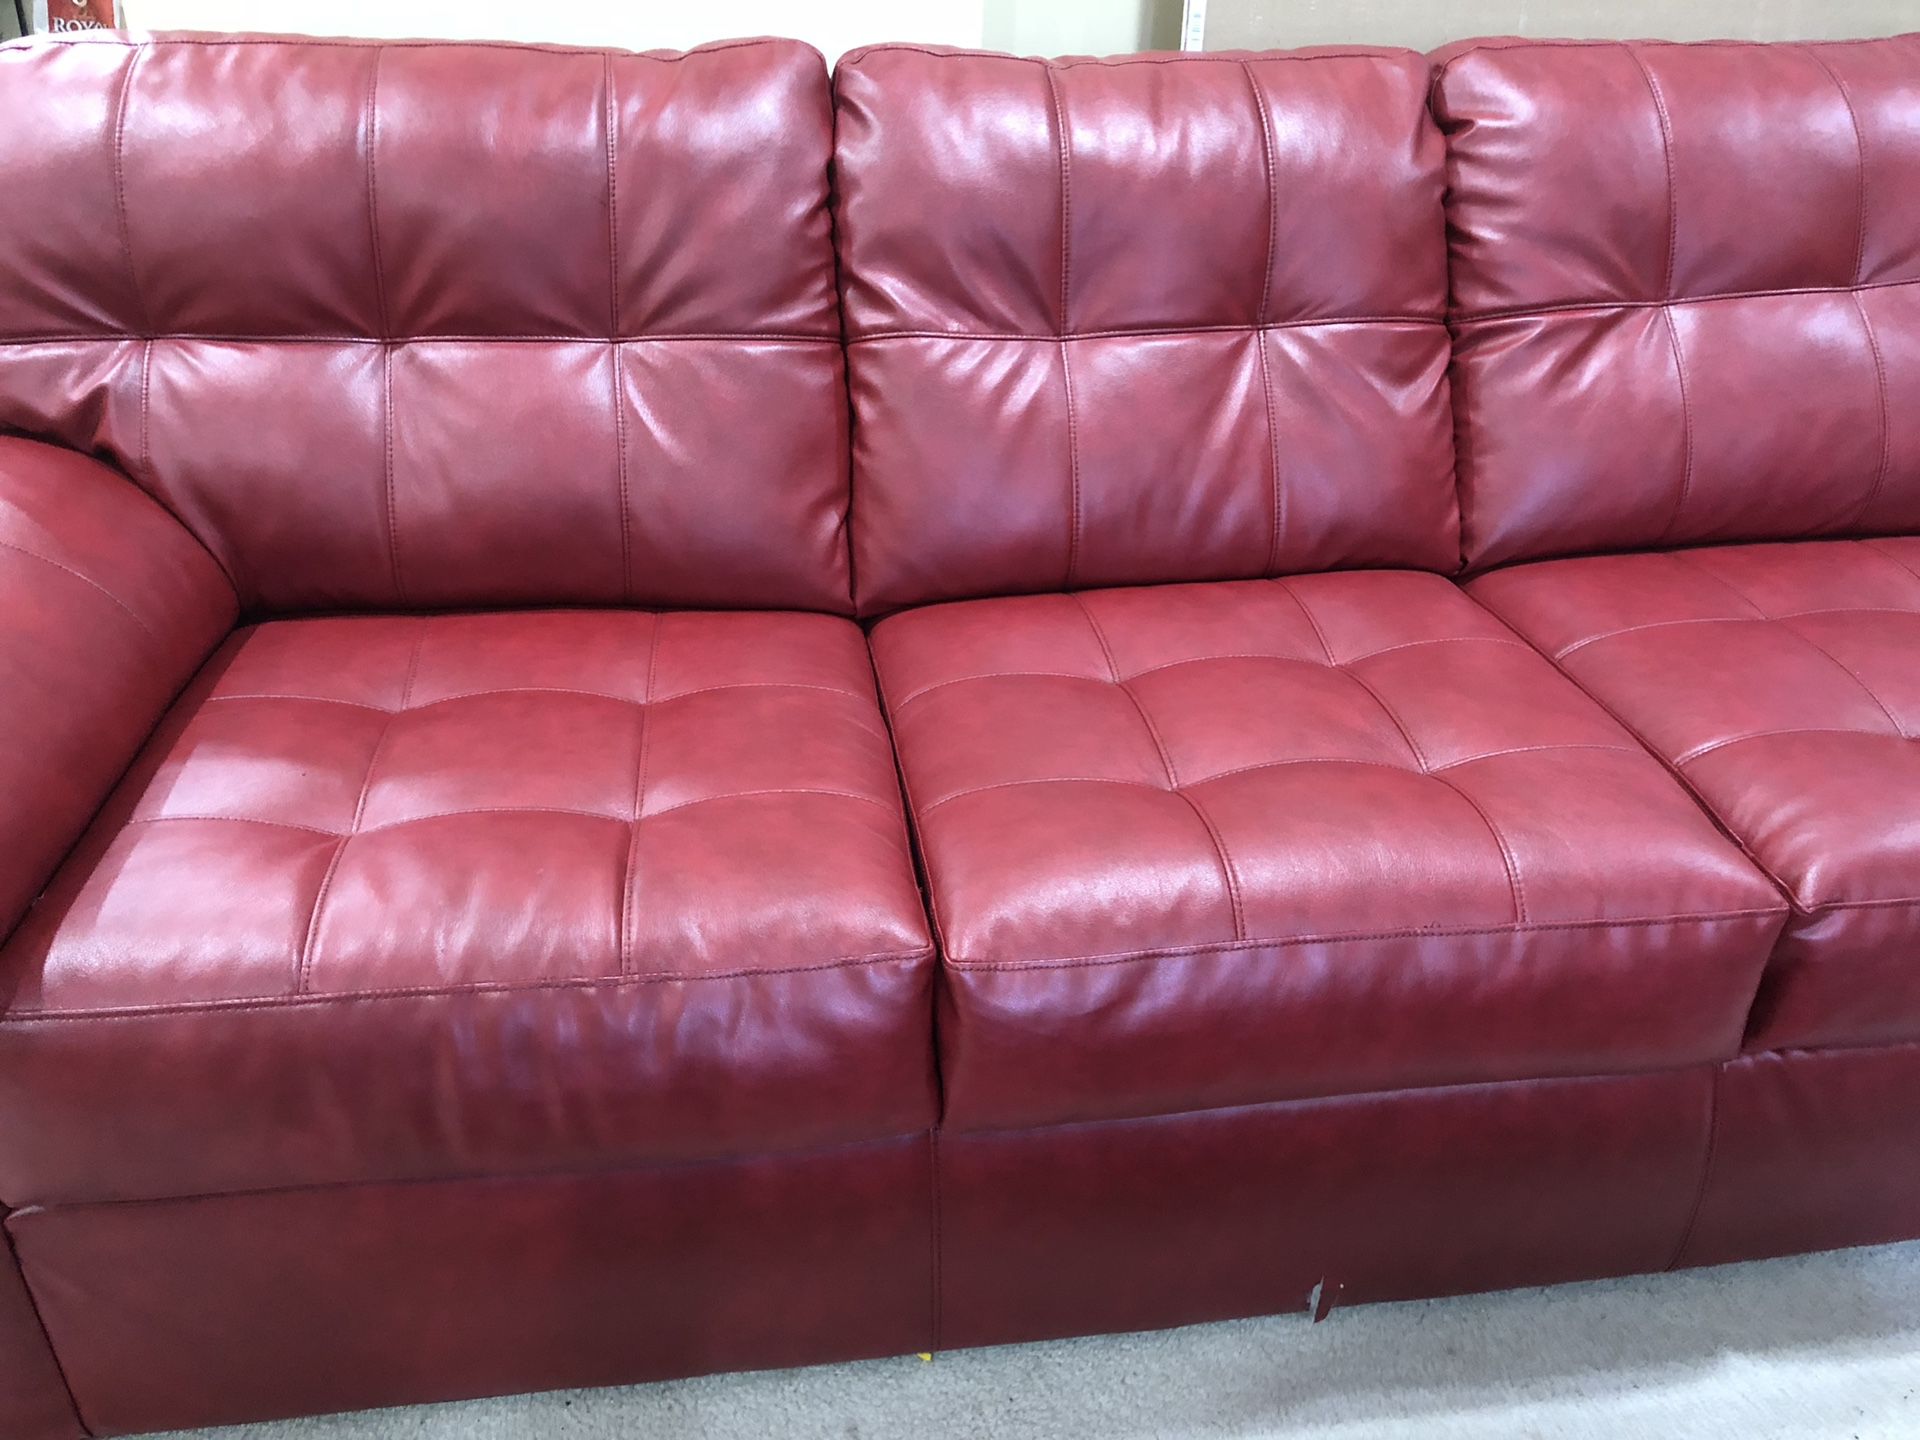 New 3 seater sofa priced to sell